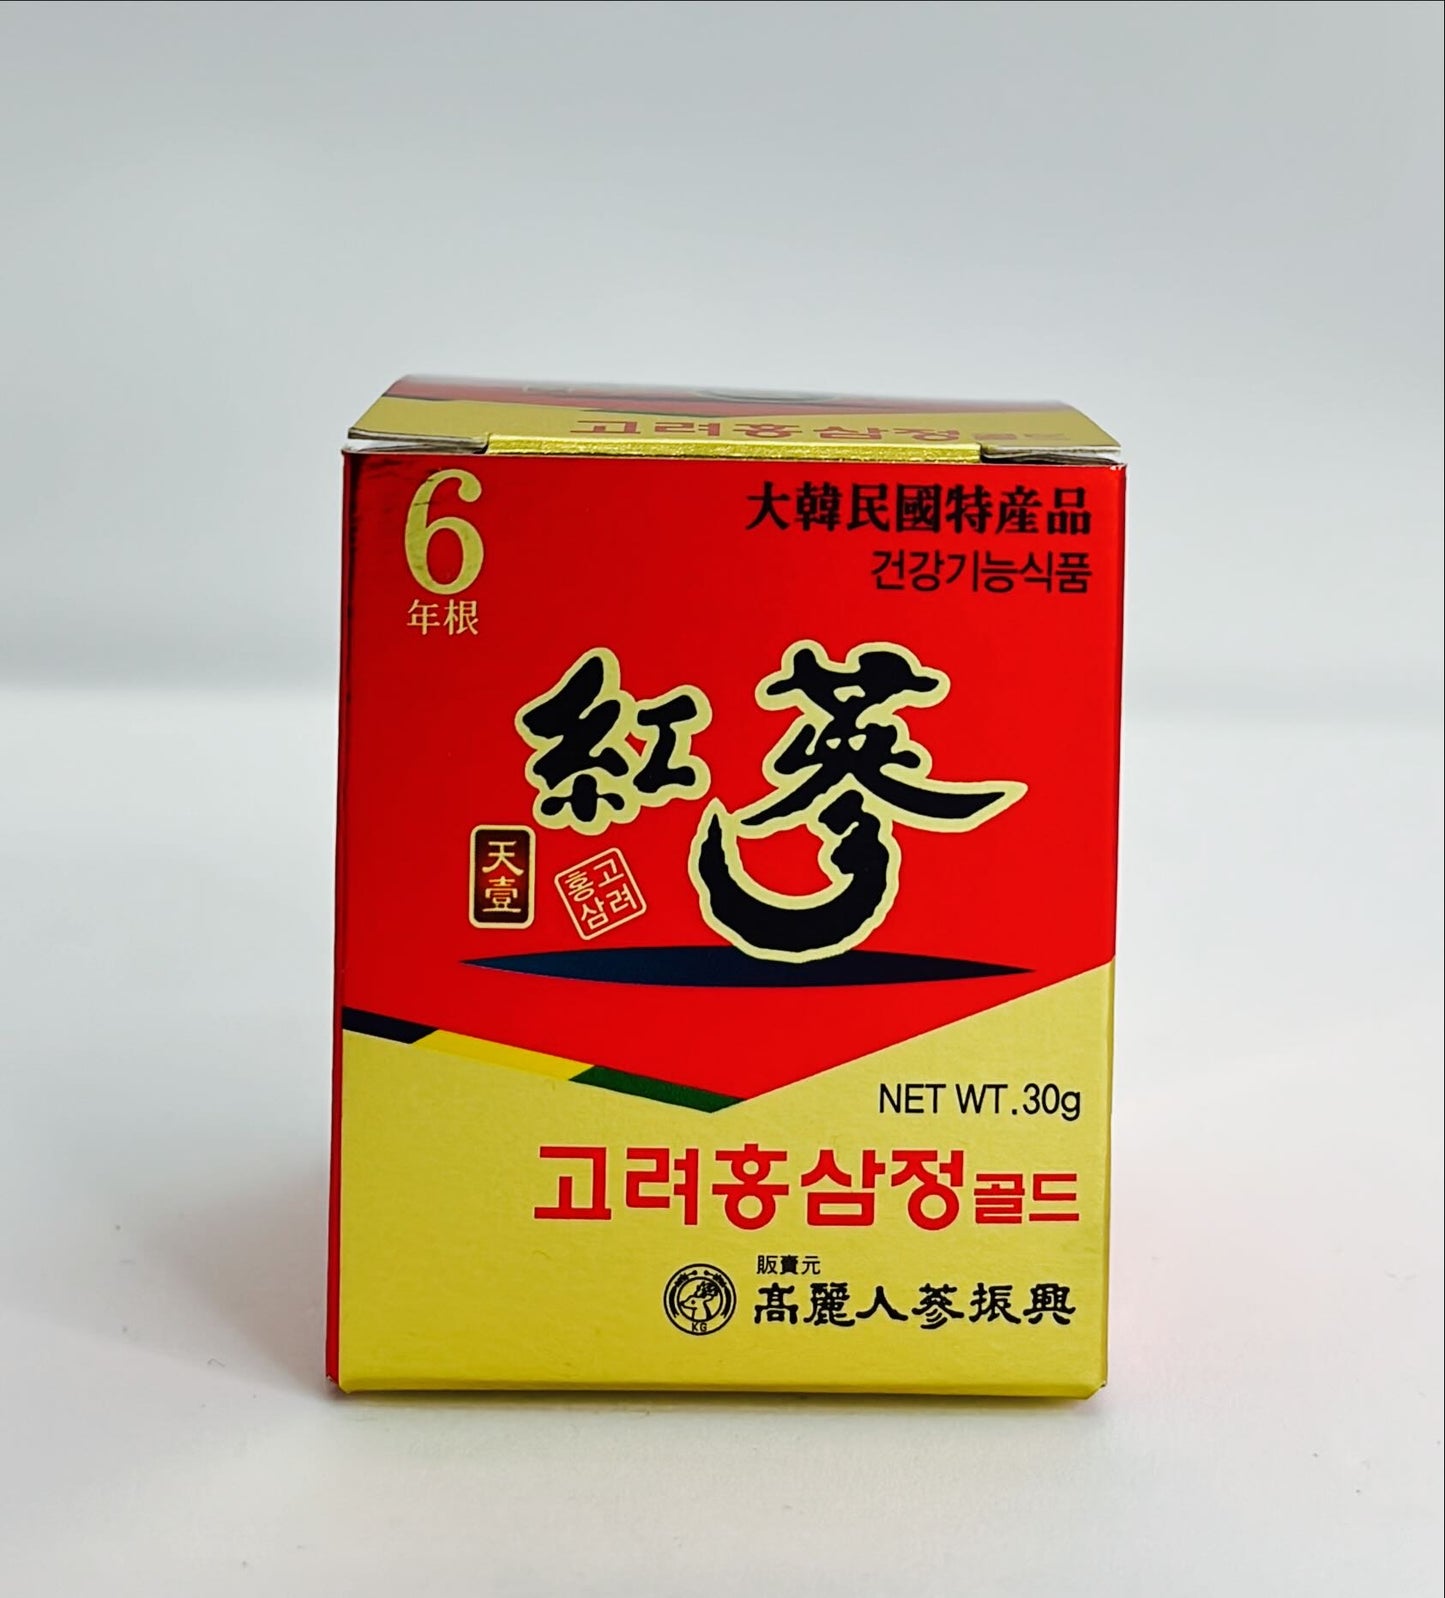 6YEARS Korean RED Ginseng Extract Gold - Ginseng Saponin GINSENOSIDE Natural Super Food Pure Extract 100% (30g)